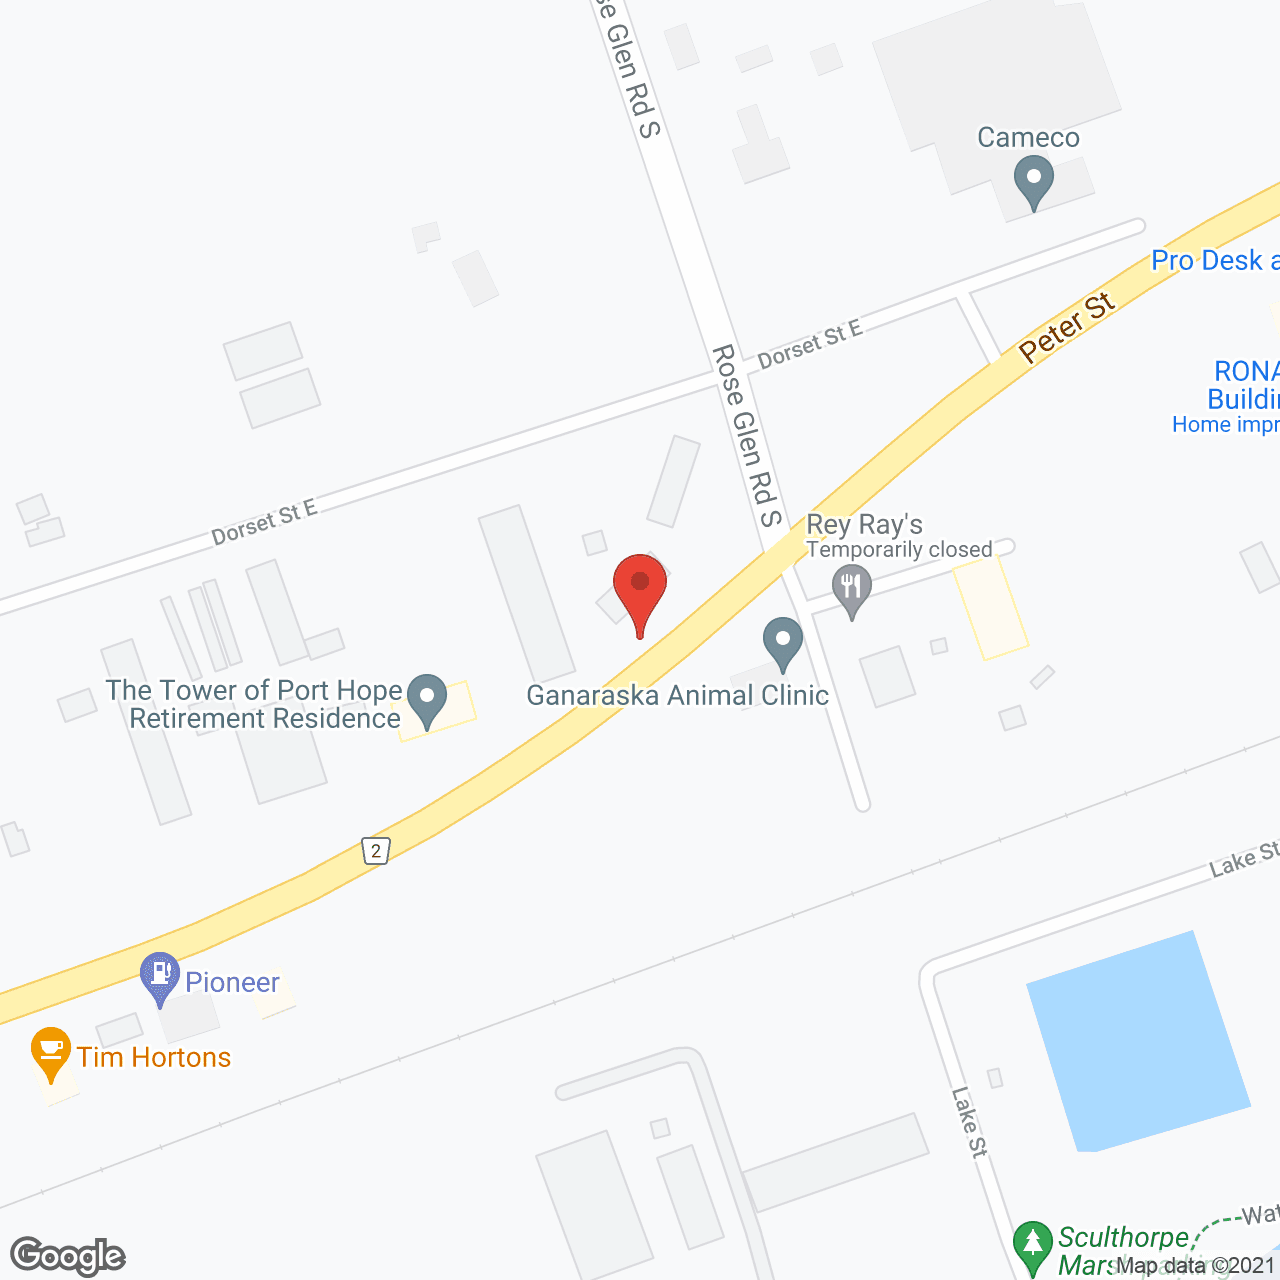 The Tower of Port Hope Retirement Residence in google map